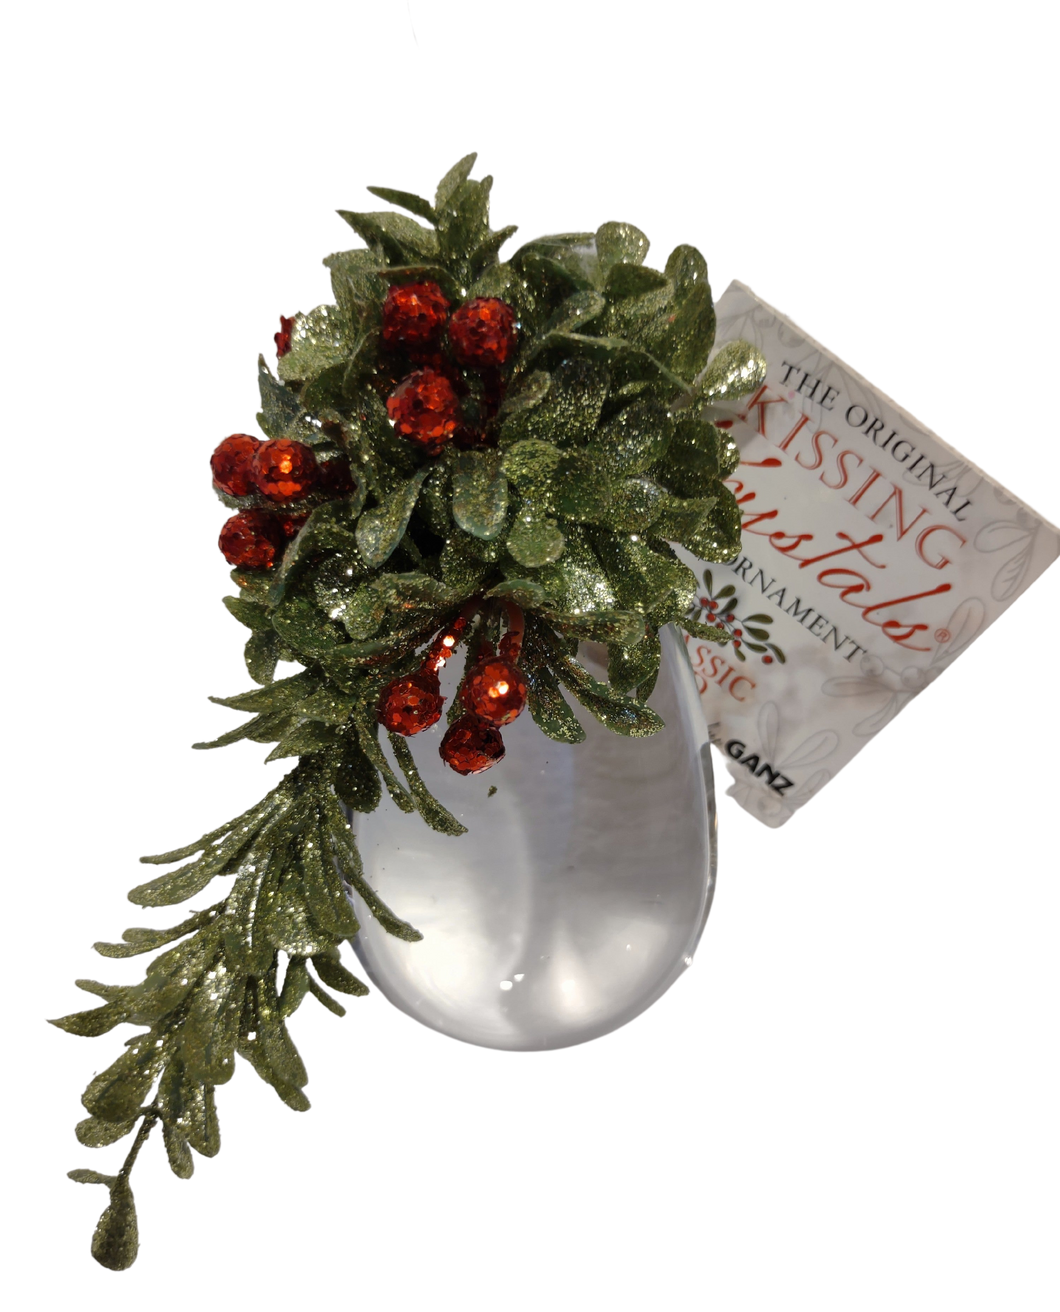 Acrylic Crystal Oval Ornament with Greenery & Red Berries 4.5